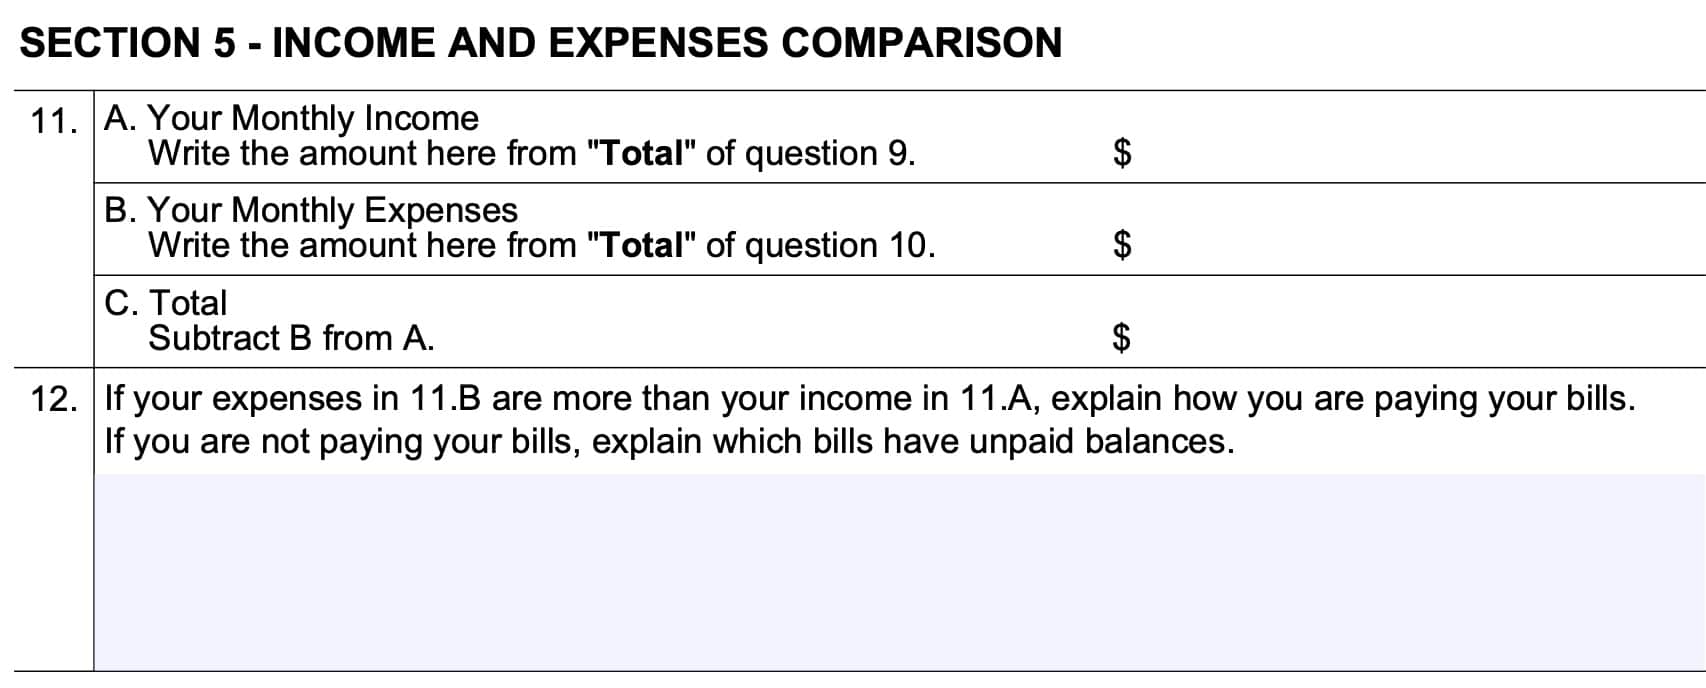 form ssa 634, section 5: income and expenses comparison